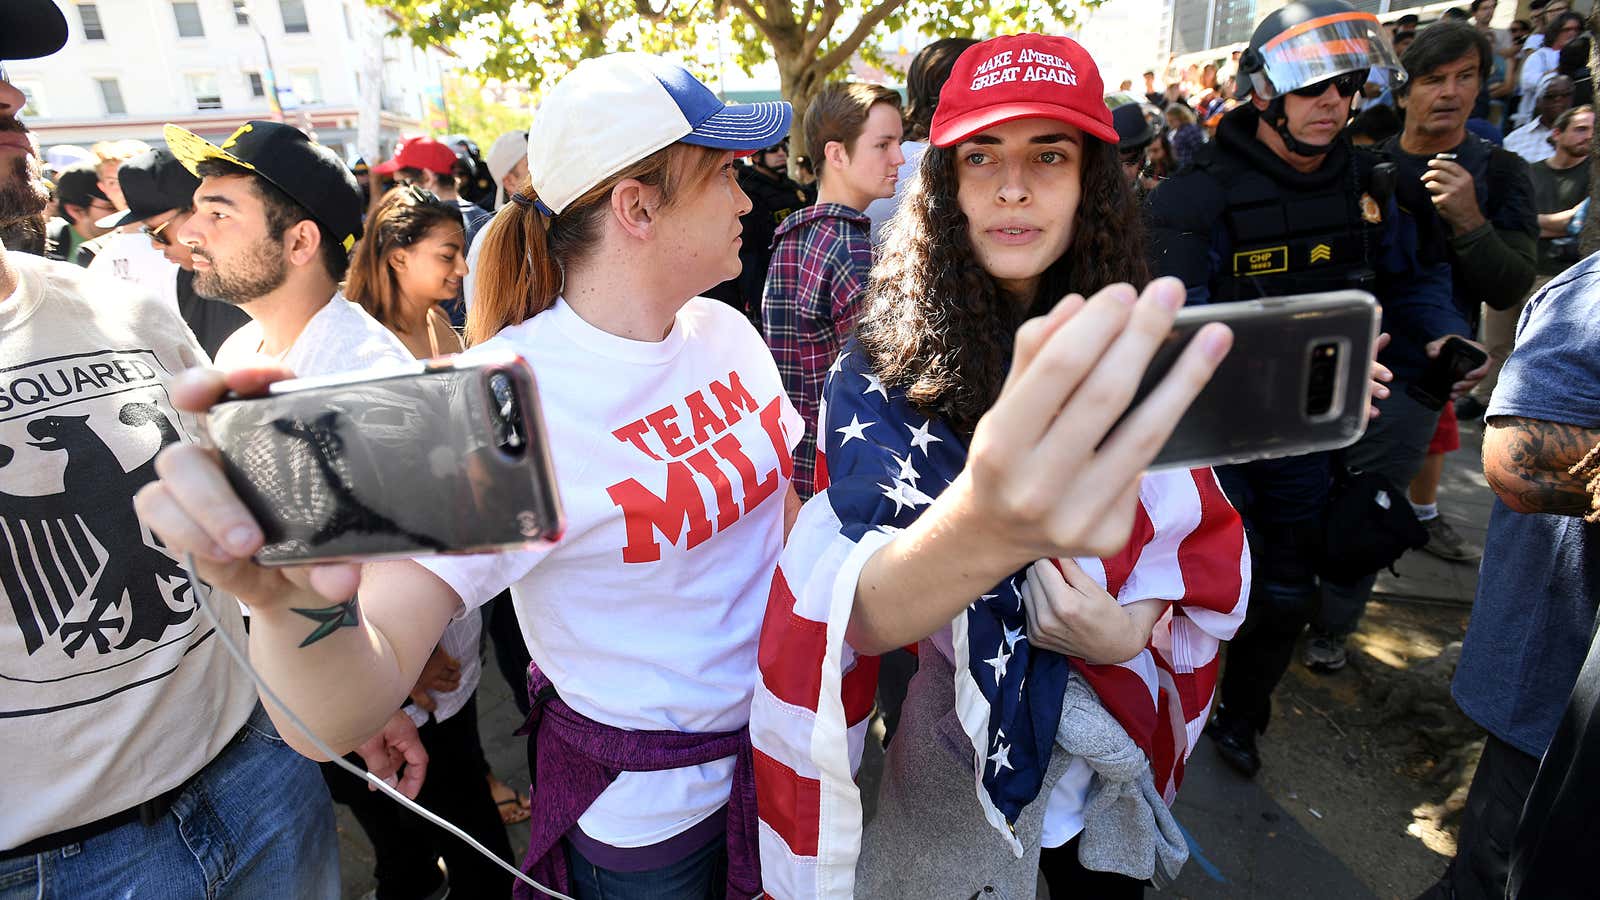 Conservative protesters rally to hear Milo Yiannopoulos speak at the University of California-Berkeley.